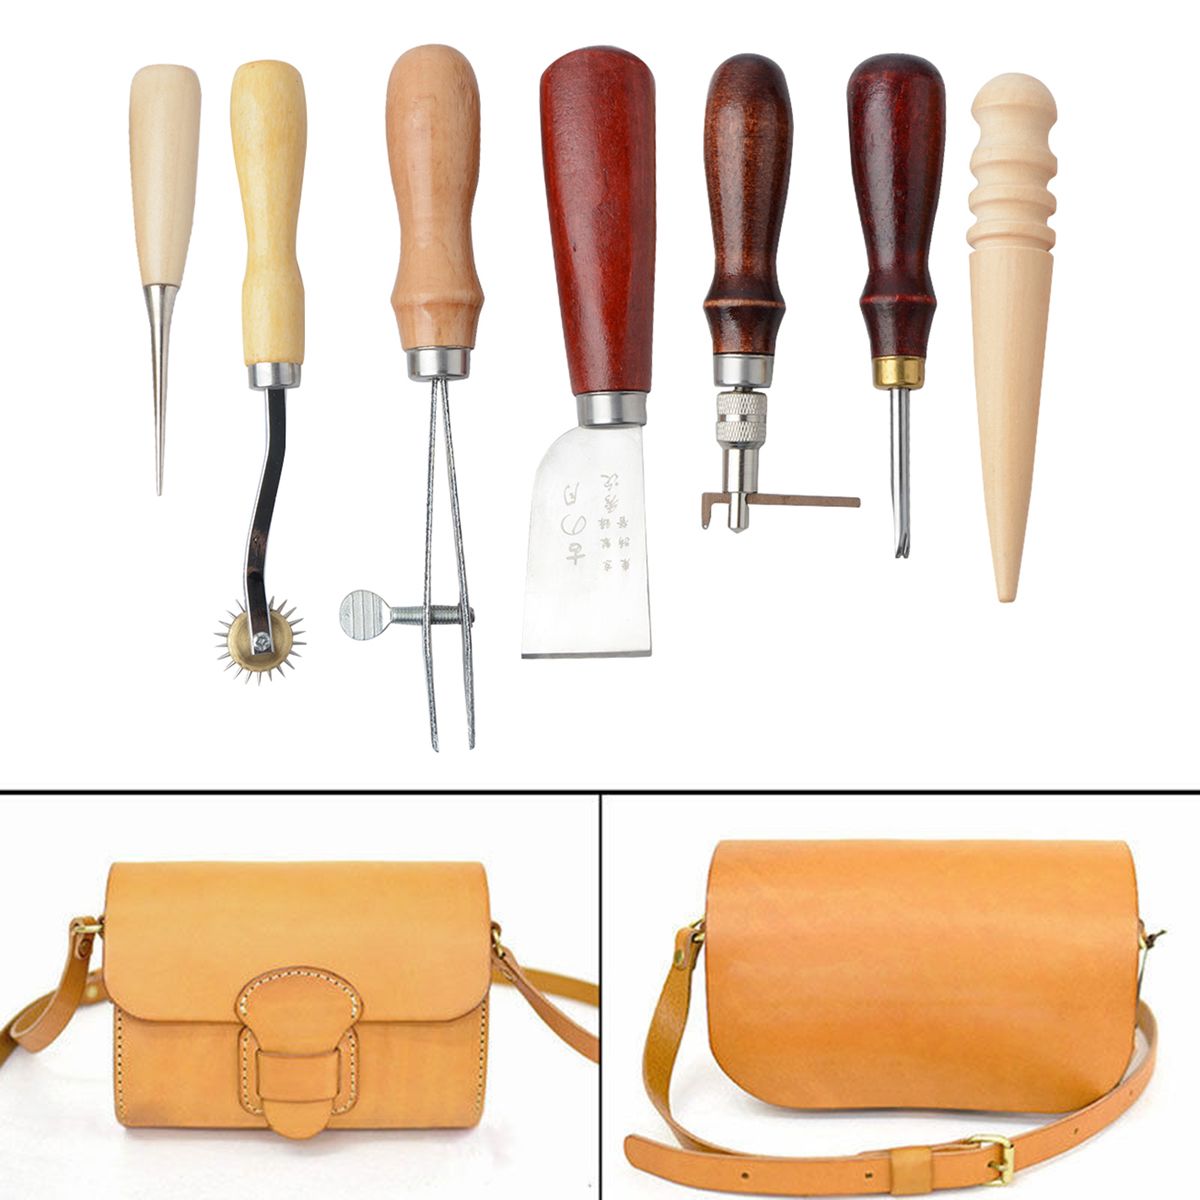 7pcs-Leather-Craft-DIY-Punch-Tools-Kit-Stitching-Carving-Sewing-Saddle-Groover-1467470